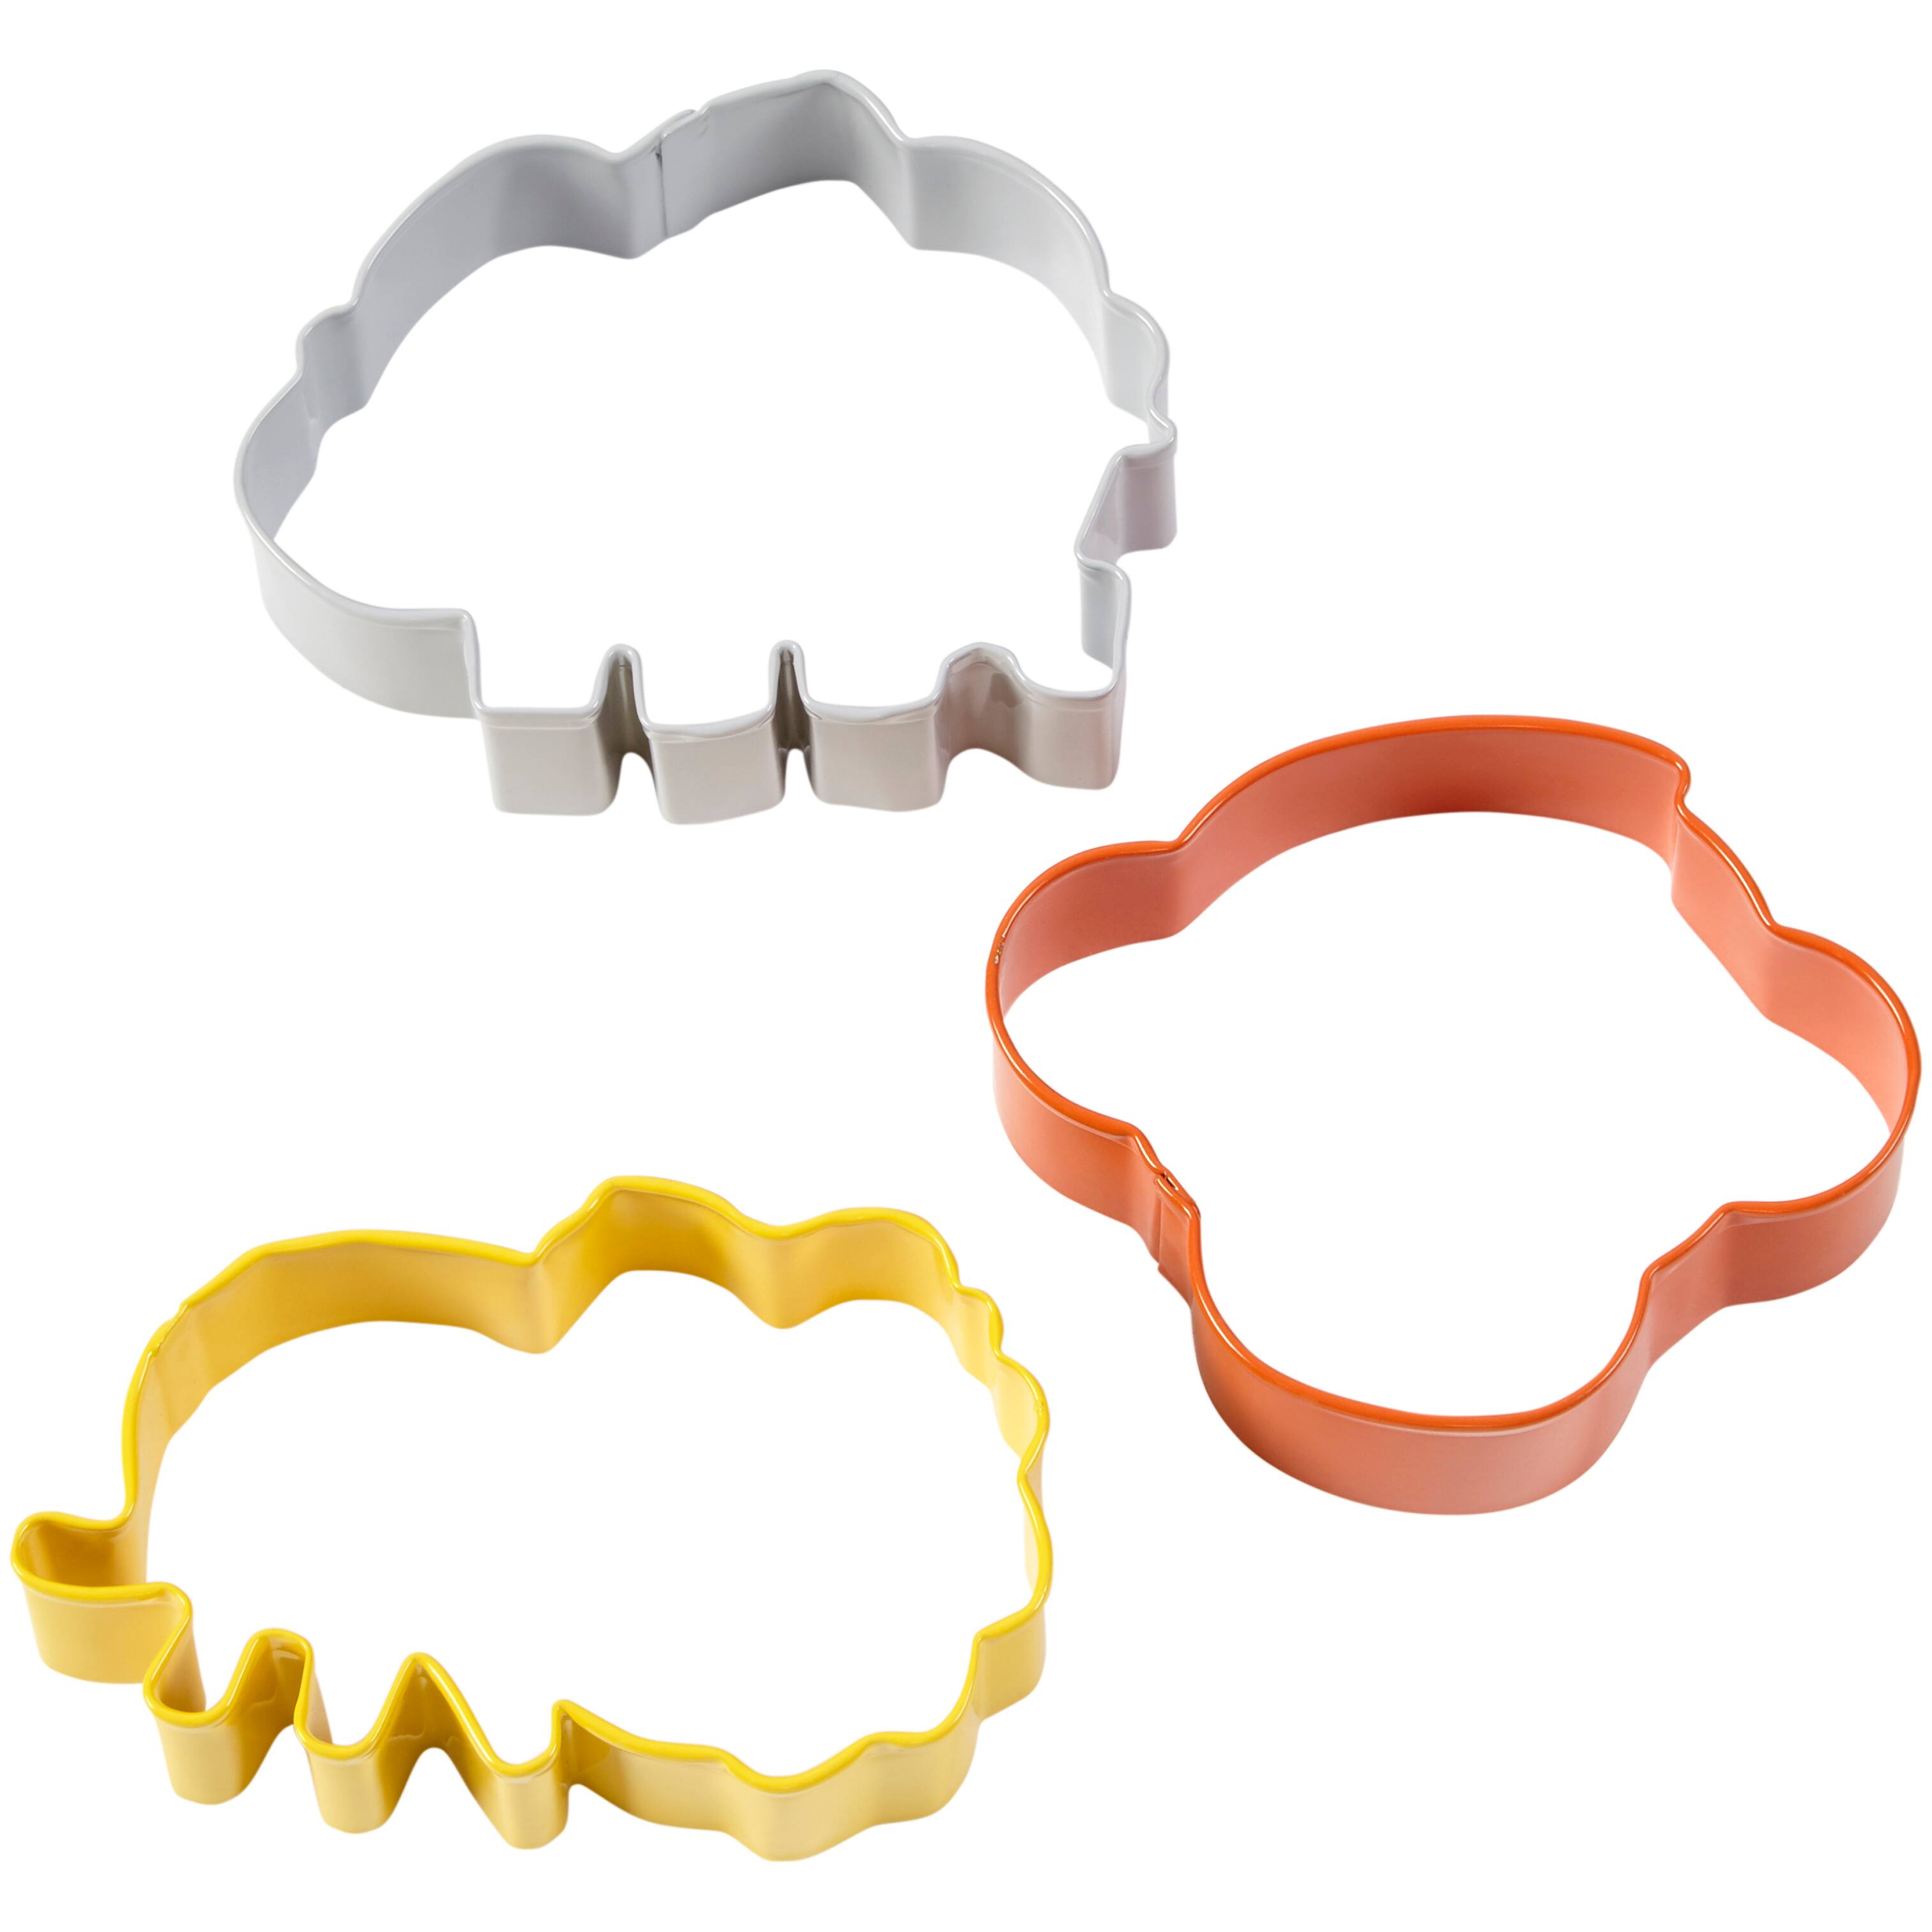 made to order cookie cutters